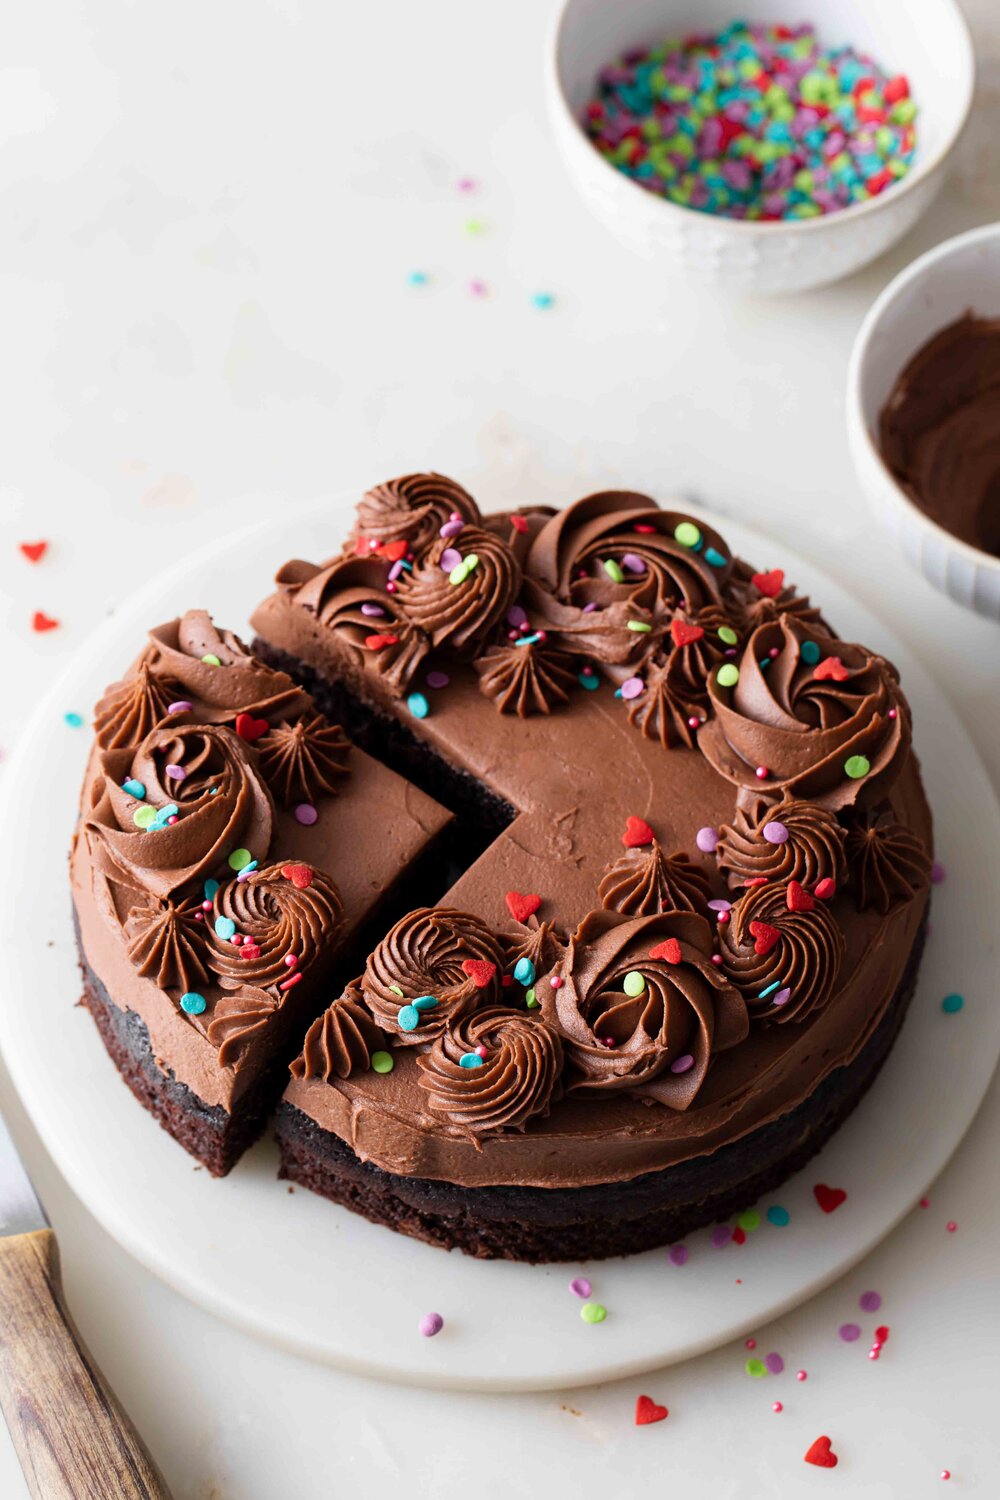 A single layer 6-inch chocolate cake with fluffy fudge frosting and sprinkle that serves just two people.